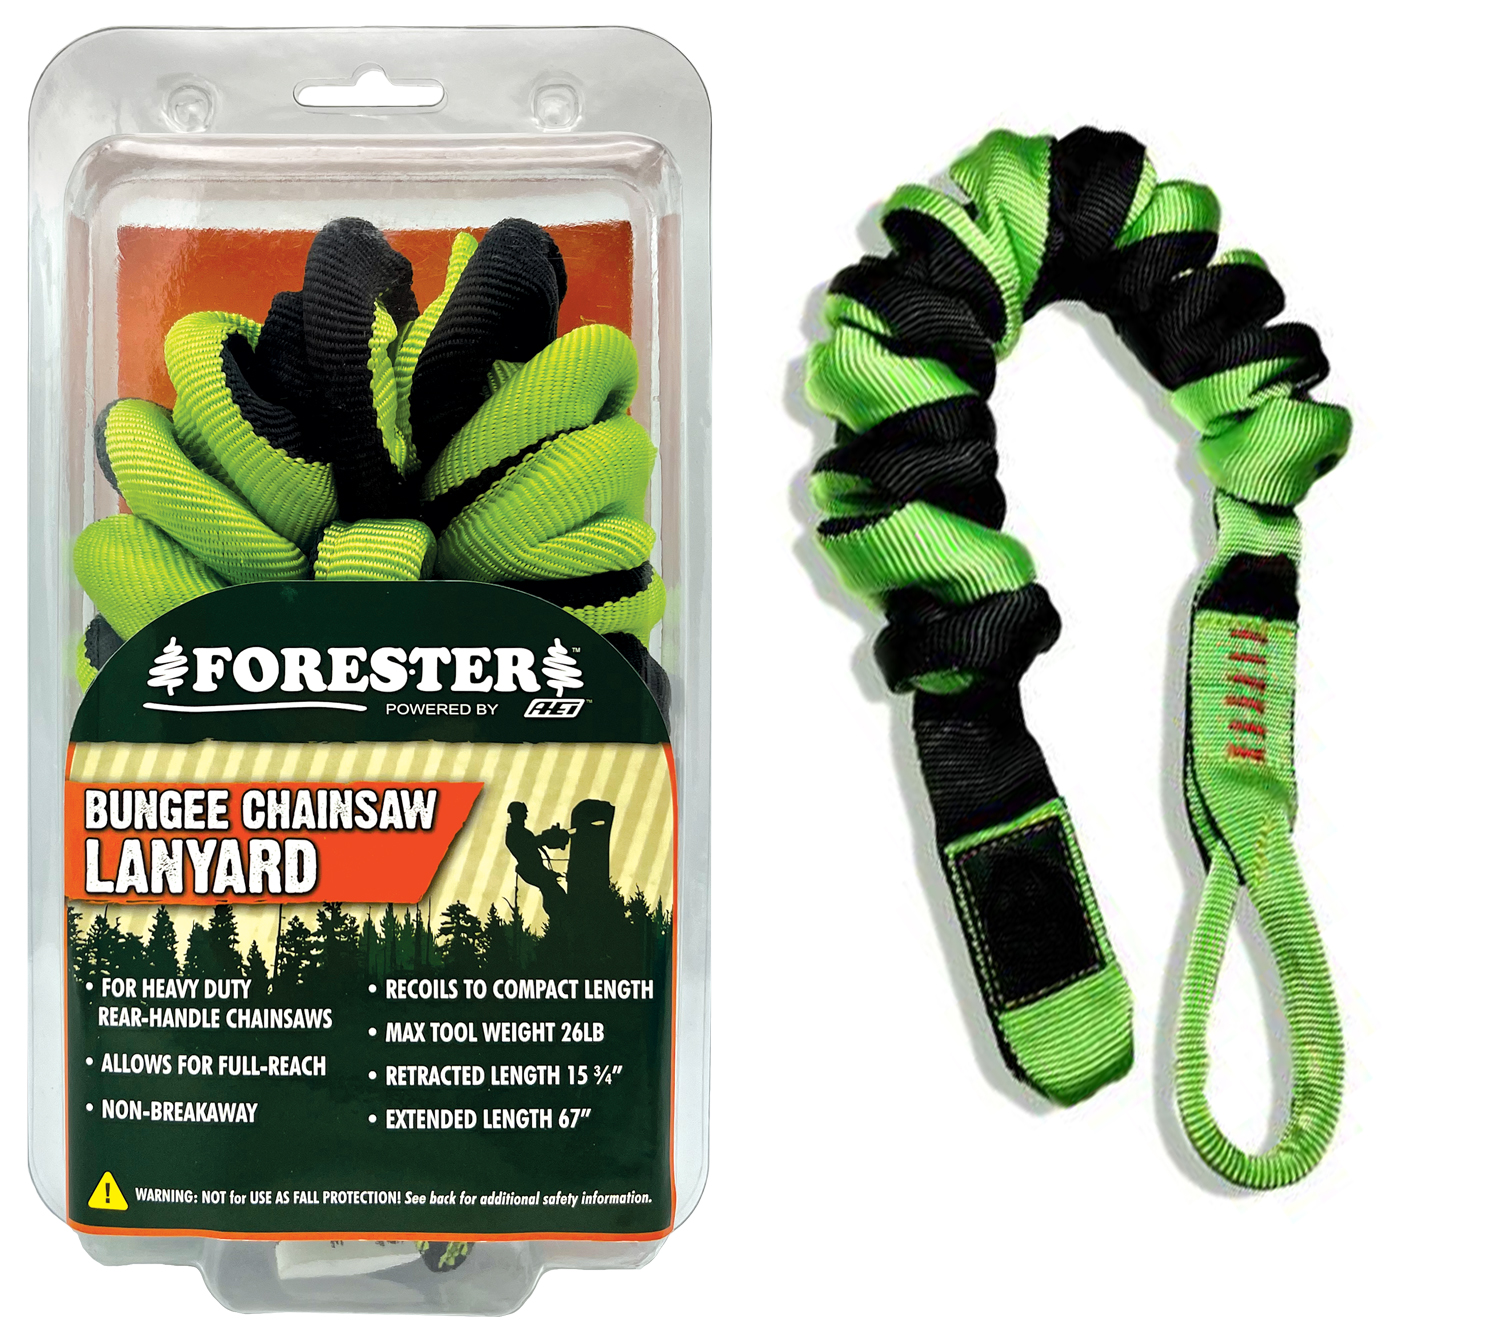 Forester Rear Handle Bungee Chainsaw Lanyard - 67 Length